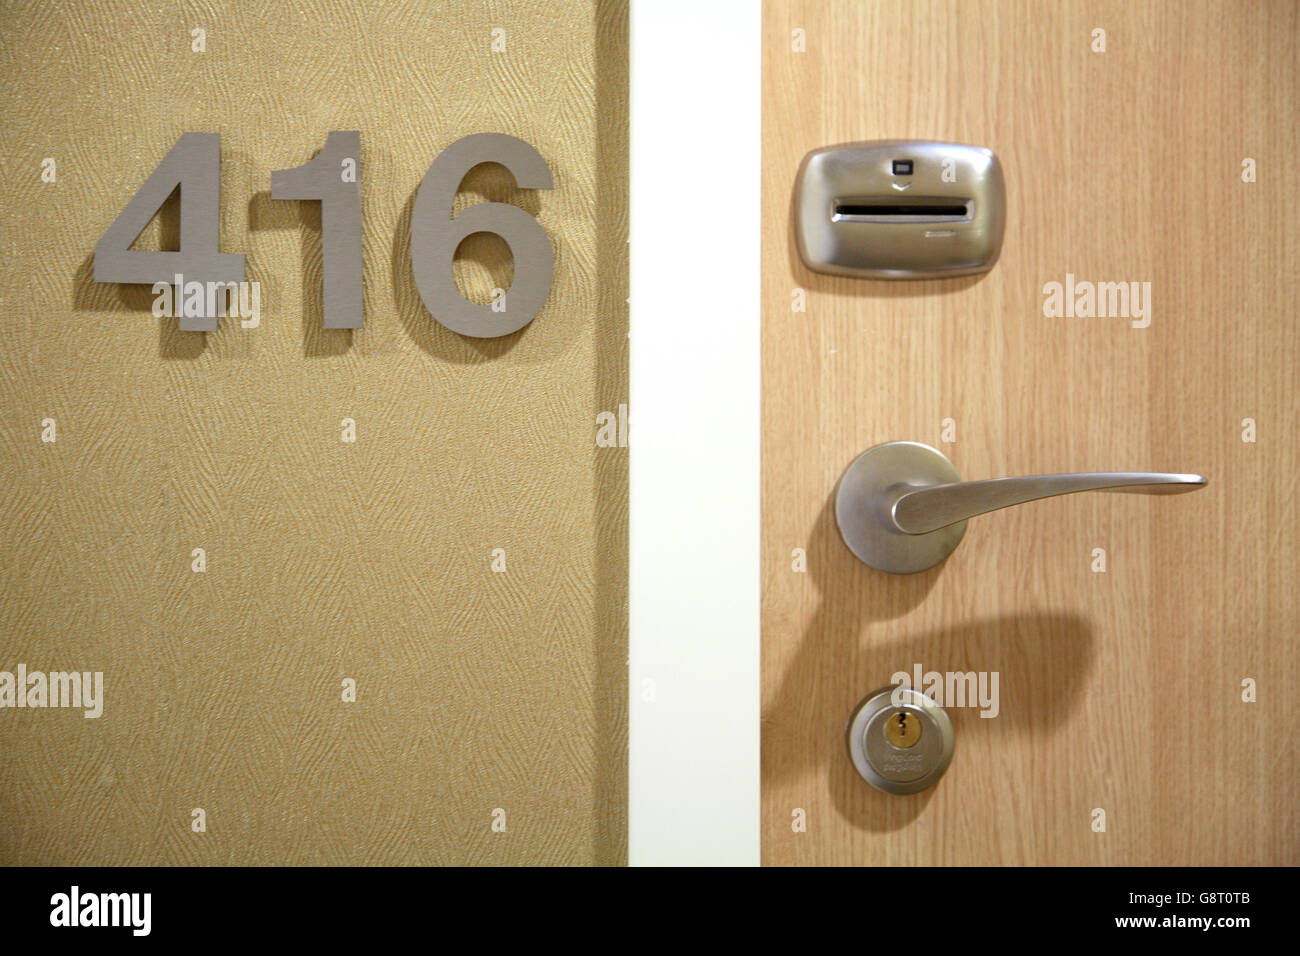 Close-up of a modern hotel door showing card-key operated access control next to metal room number sign Stock Photo